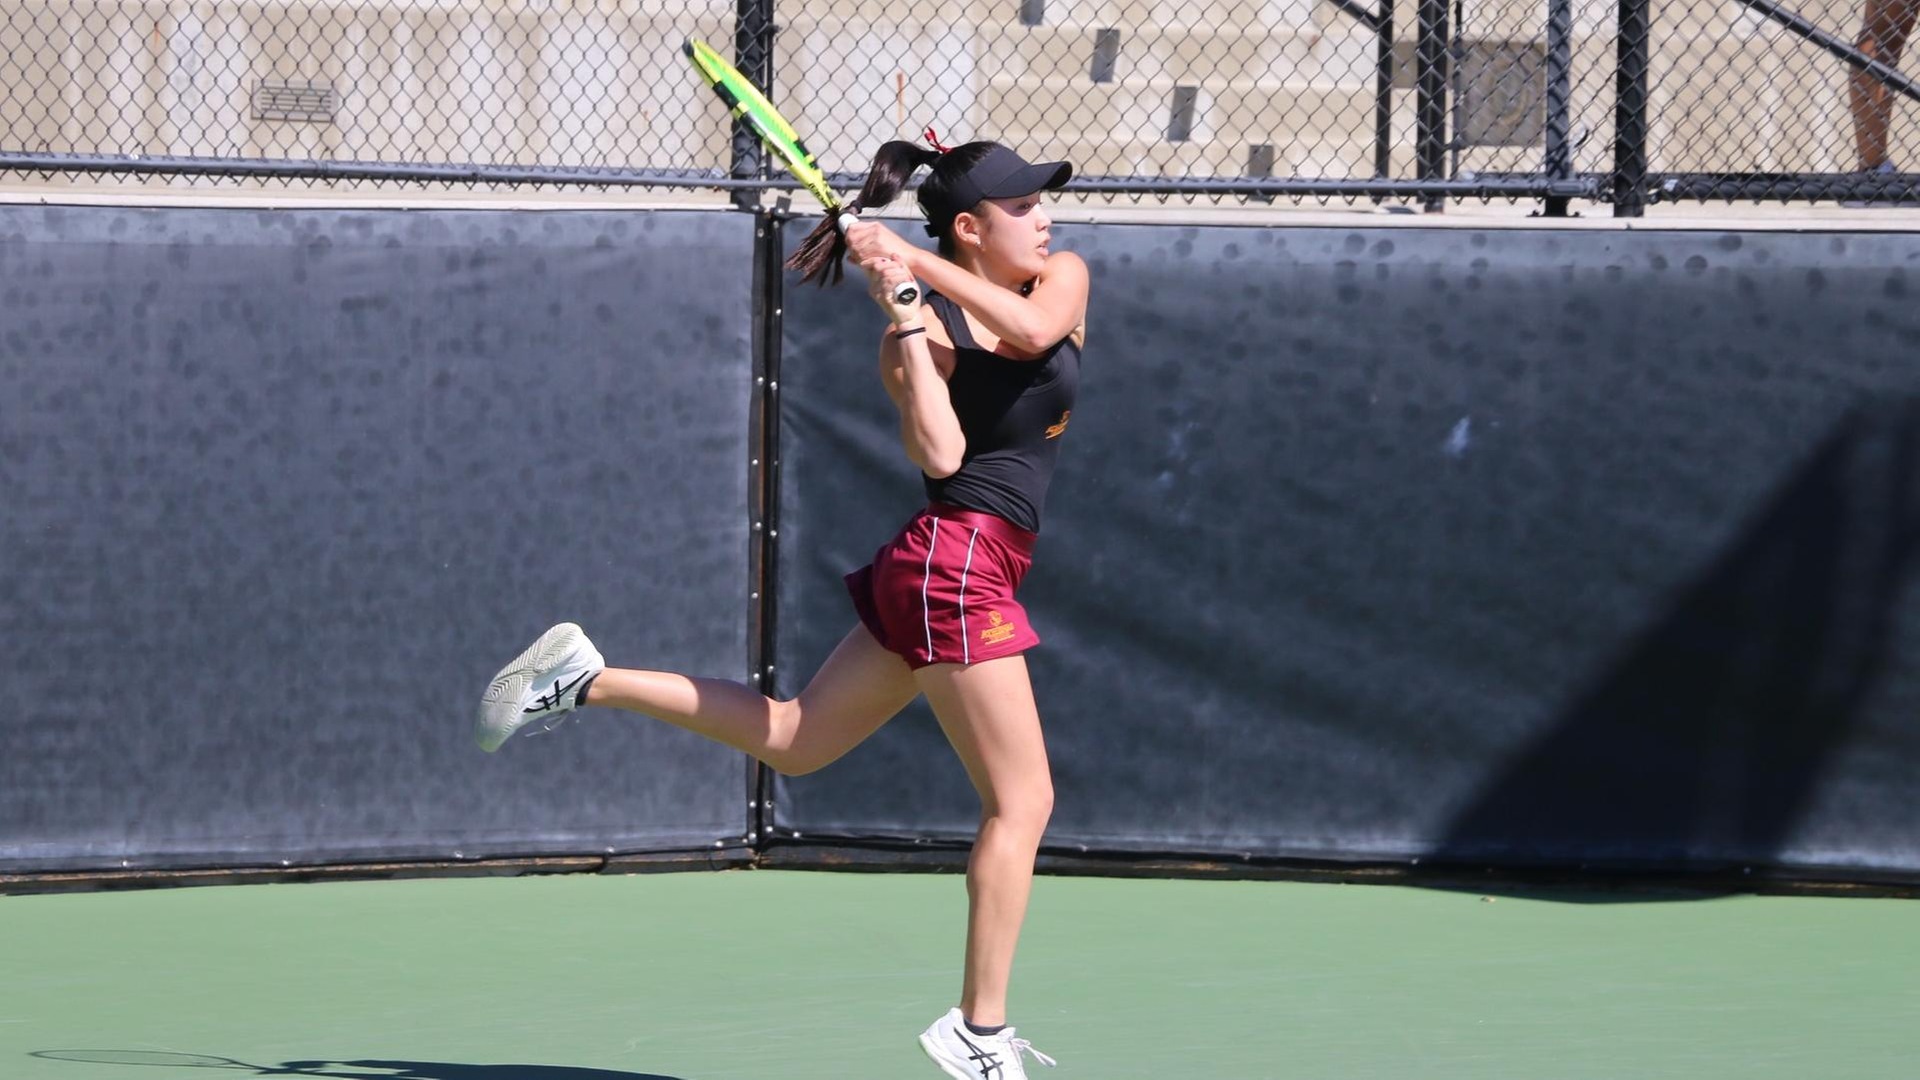 Sydney Lee had wins in singles and doubles for the Athenas